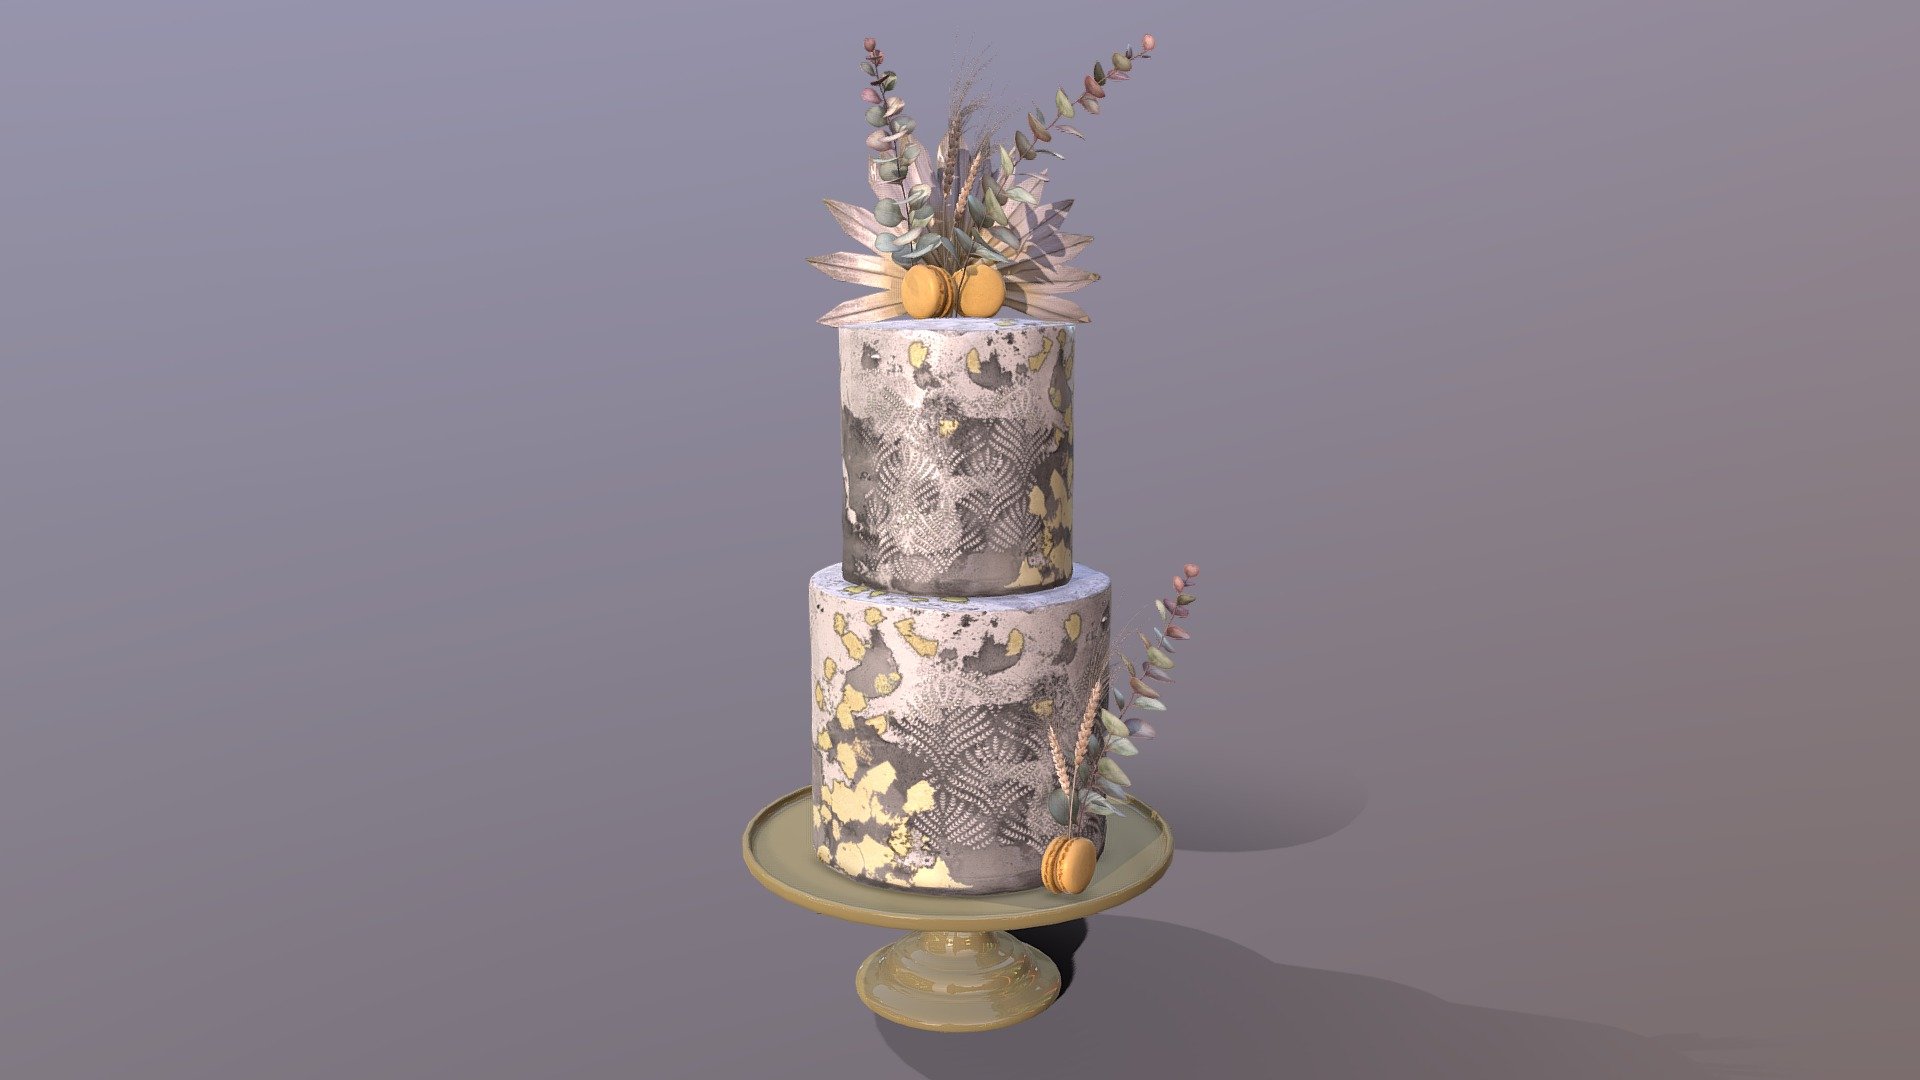 3D scan of a Elegant Eucalyptus Cake on the elegant mosser stand which is made by CAKESBURG Online Premium Cake Shop in UK.

This 3D cake can be personalised with any text and colour you want. Please contact us.

Cake Textures - 4096*4096px PBR photoscan-based materials (Base Color, Normal, Roughness, Specular, AO)

Macarone textures - 4096*4096px PBR photoscan-based materials (Base Color, Normal, Roughness, Specular, AO)

Palm, Eucalyptus and Wheat Textures - 4096*4096px PBR photoscan-based materials (Base Color, Normal, Roughness, Specular, AO) - Elegant Eucalyptus Wedding Cake - Buy Royalty Free 3D model by Cakesburg Premium 3D Cake Shop (@Viscom_Cakesburg) 3d model